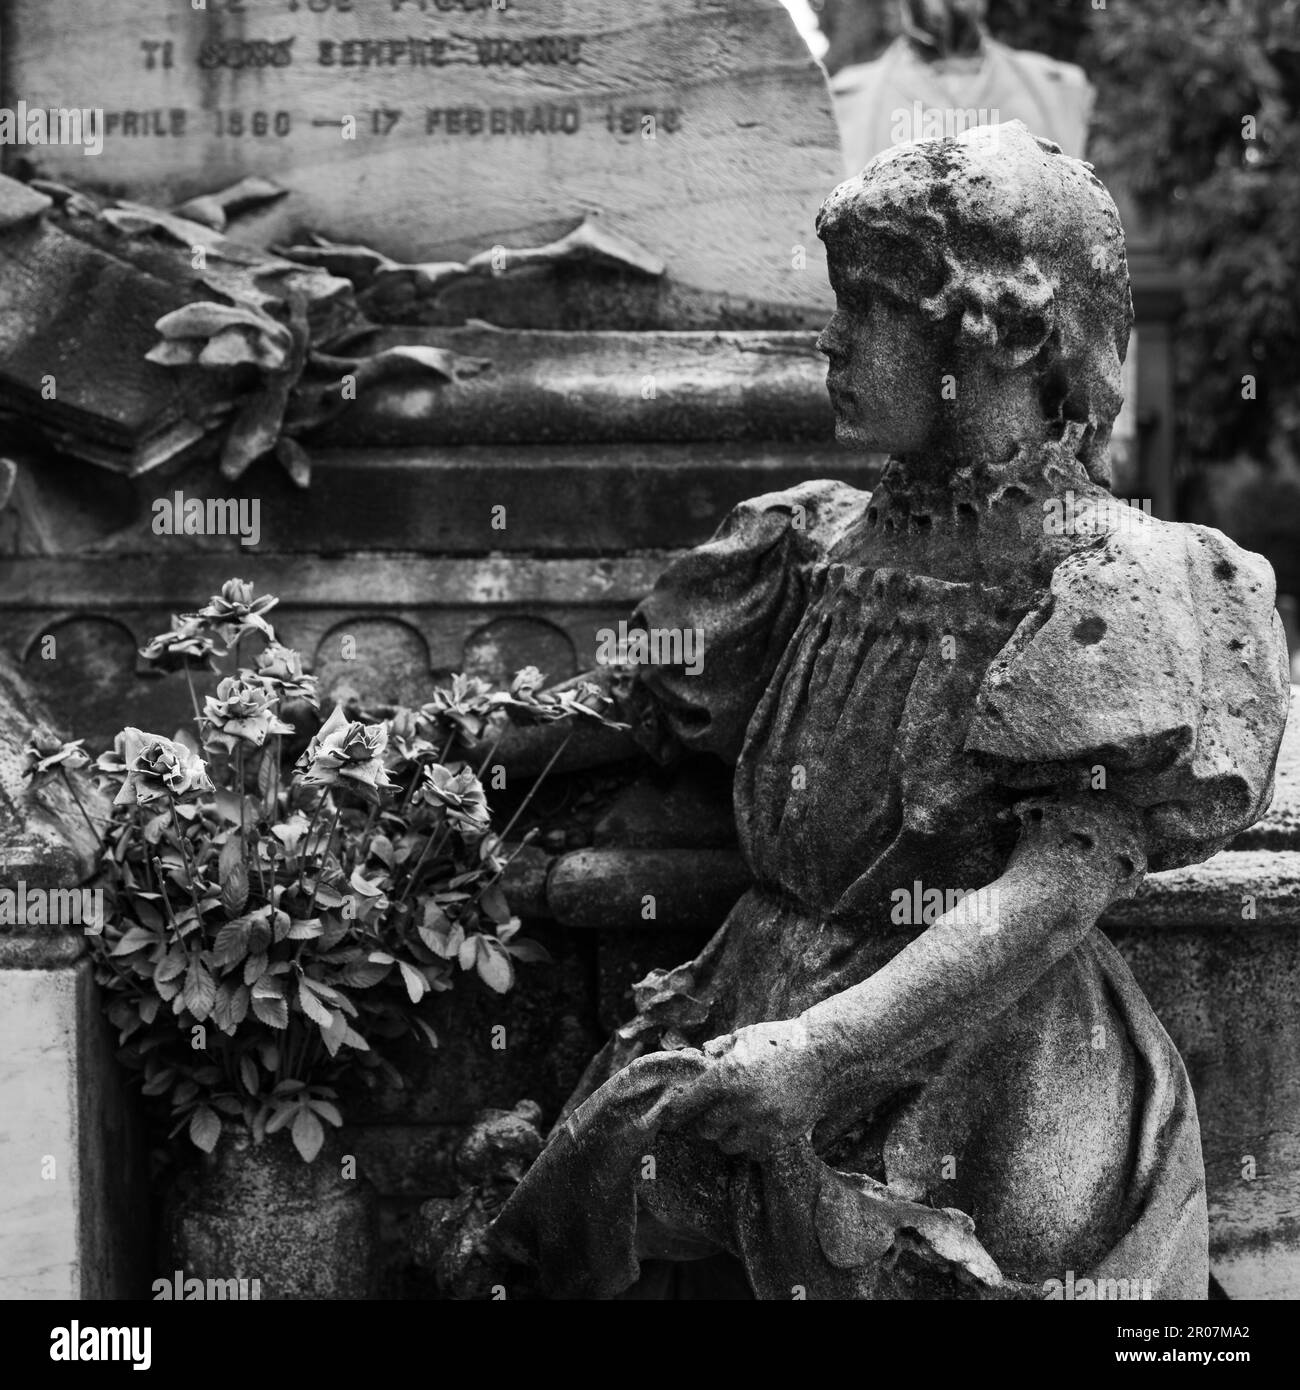 More than 100 years old statue. Cemetery located in North Italy Stock Photo